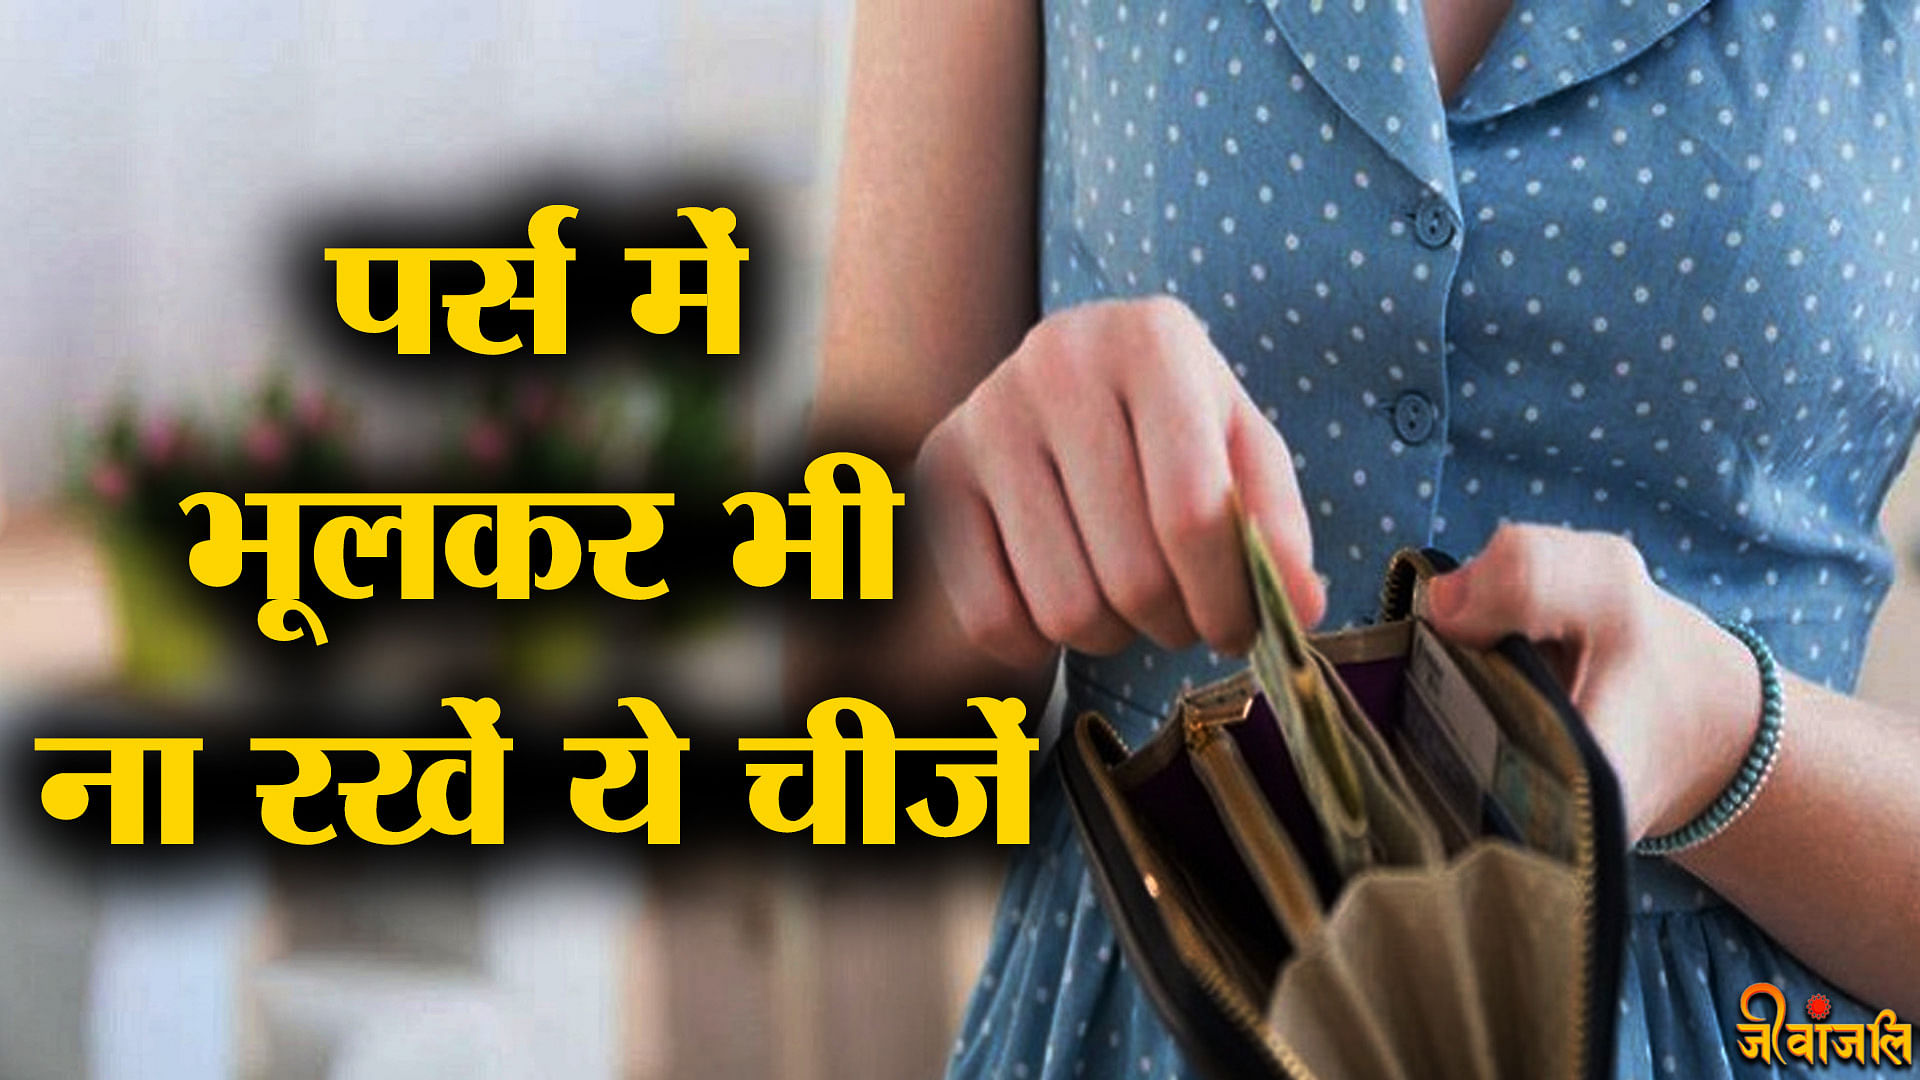 Vastu Tips For Purse: Vastu Tips For Wallet And Purse Know what things  should not be kept in the purse -Vastu Tips For Purse: पर्स में रखी हैं अगर  ये चीजें तो